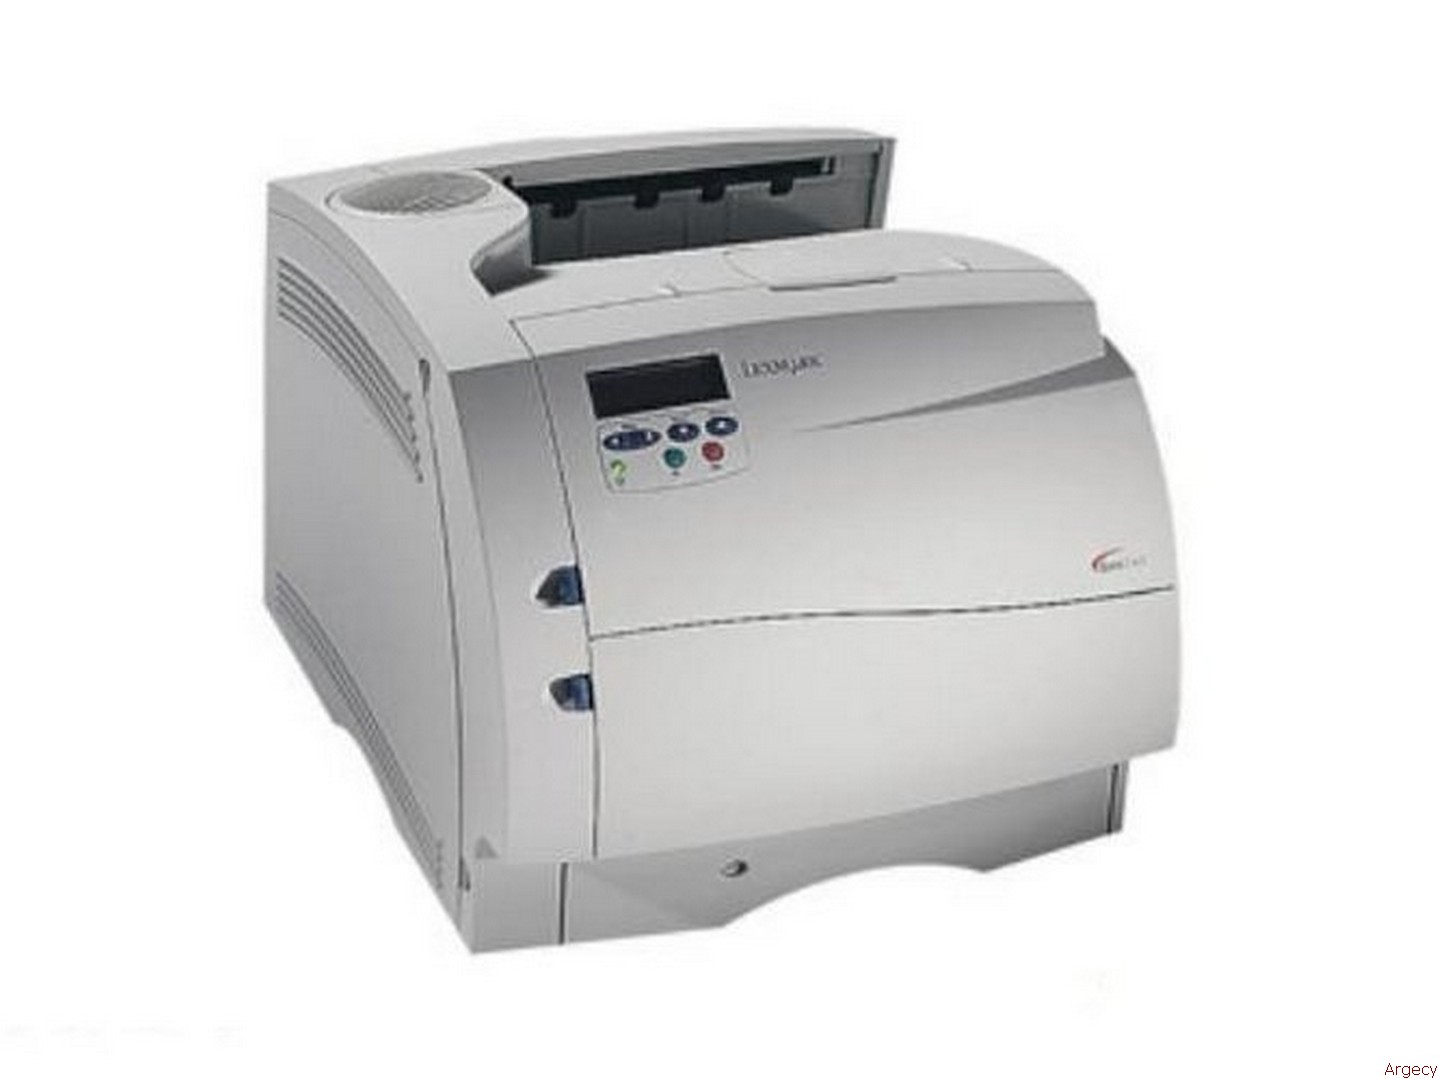 Lexmark 4059-165 S1625 43j2600 - purchase from Argecy